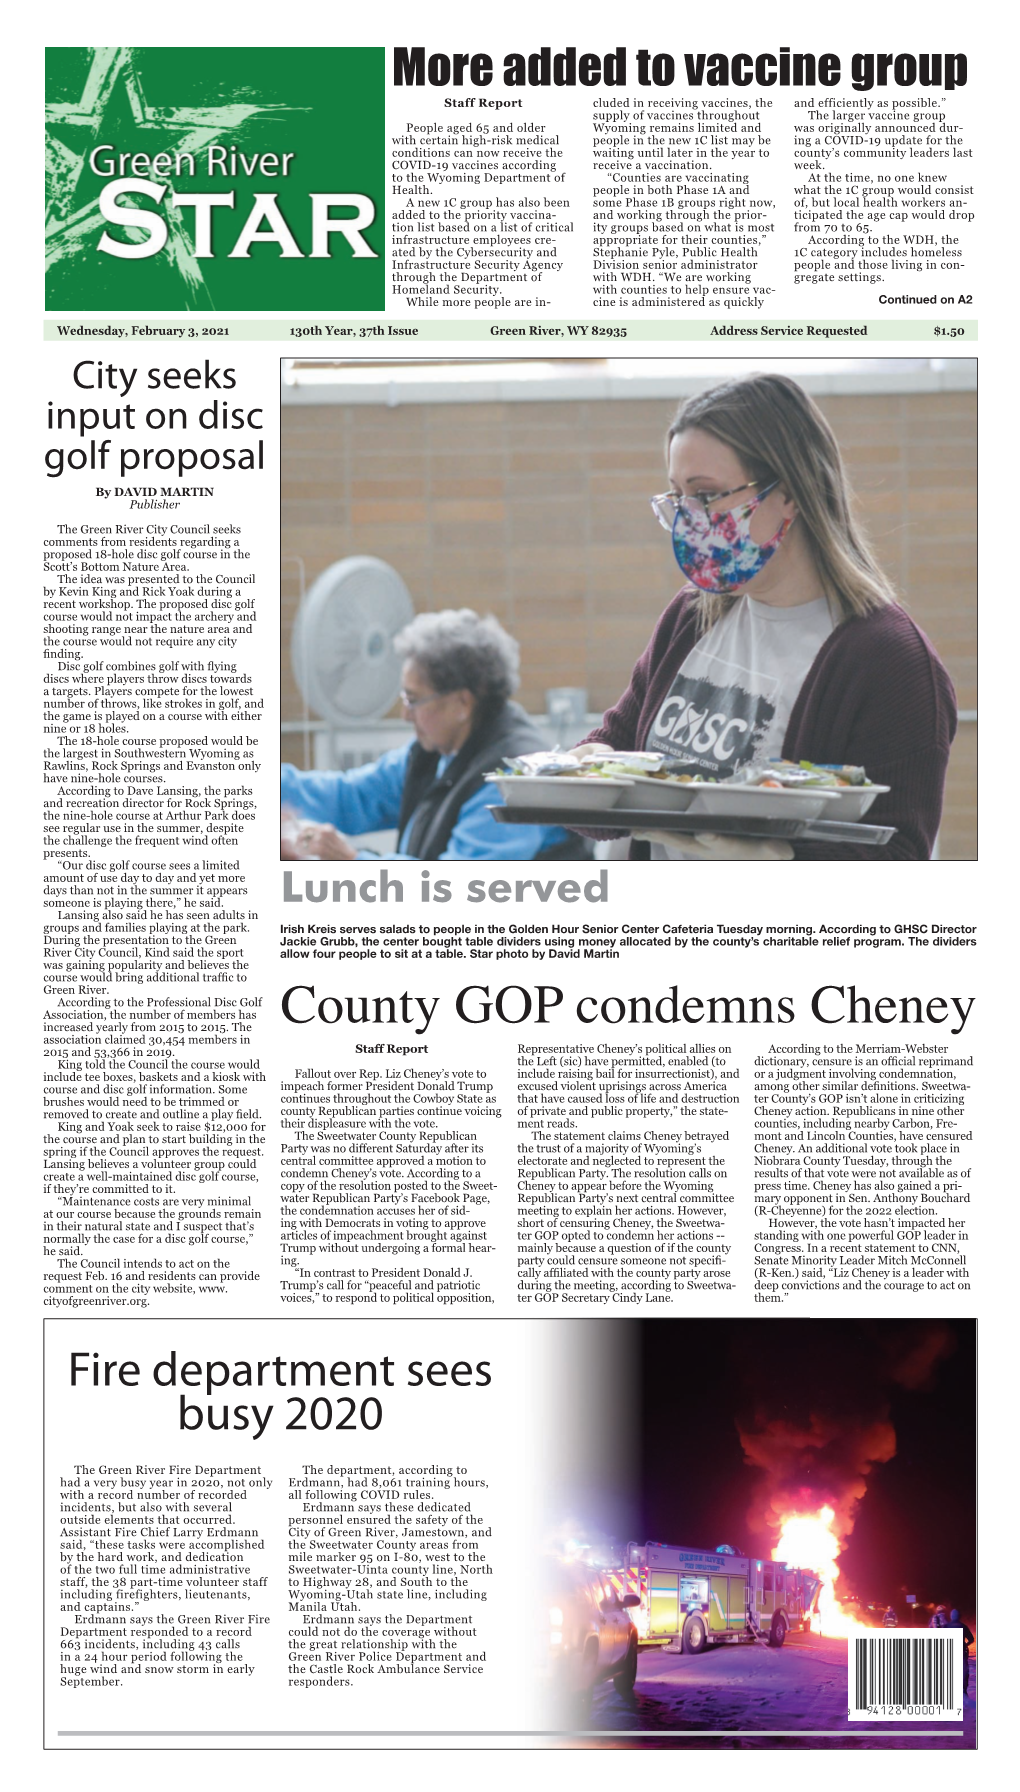 County GOP Condemns Cheney Association Claimed 30,454 Members in 2015 and 53,366 in 2019